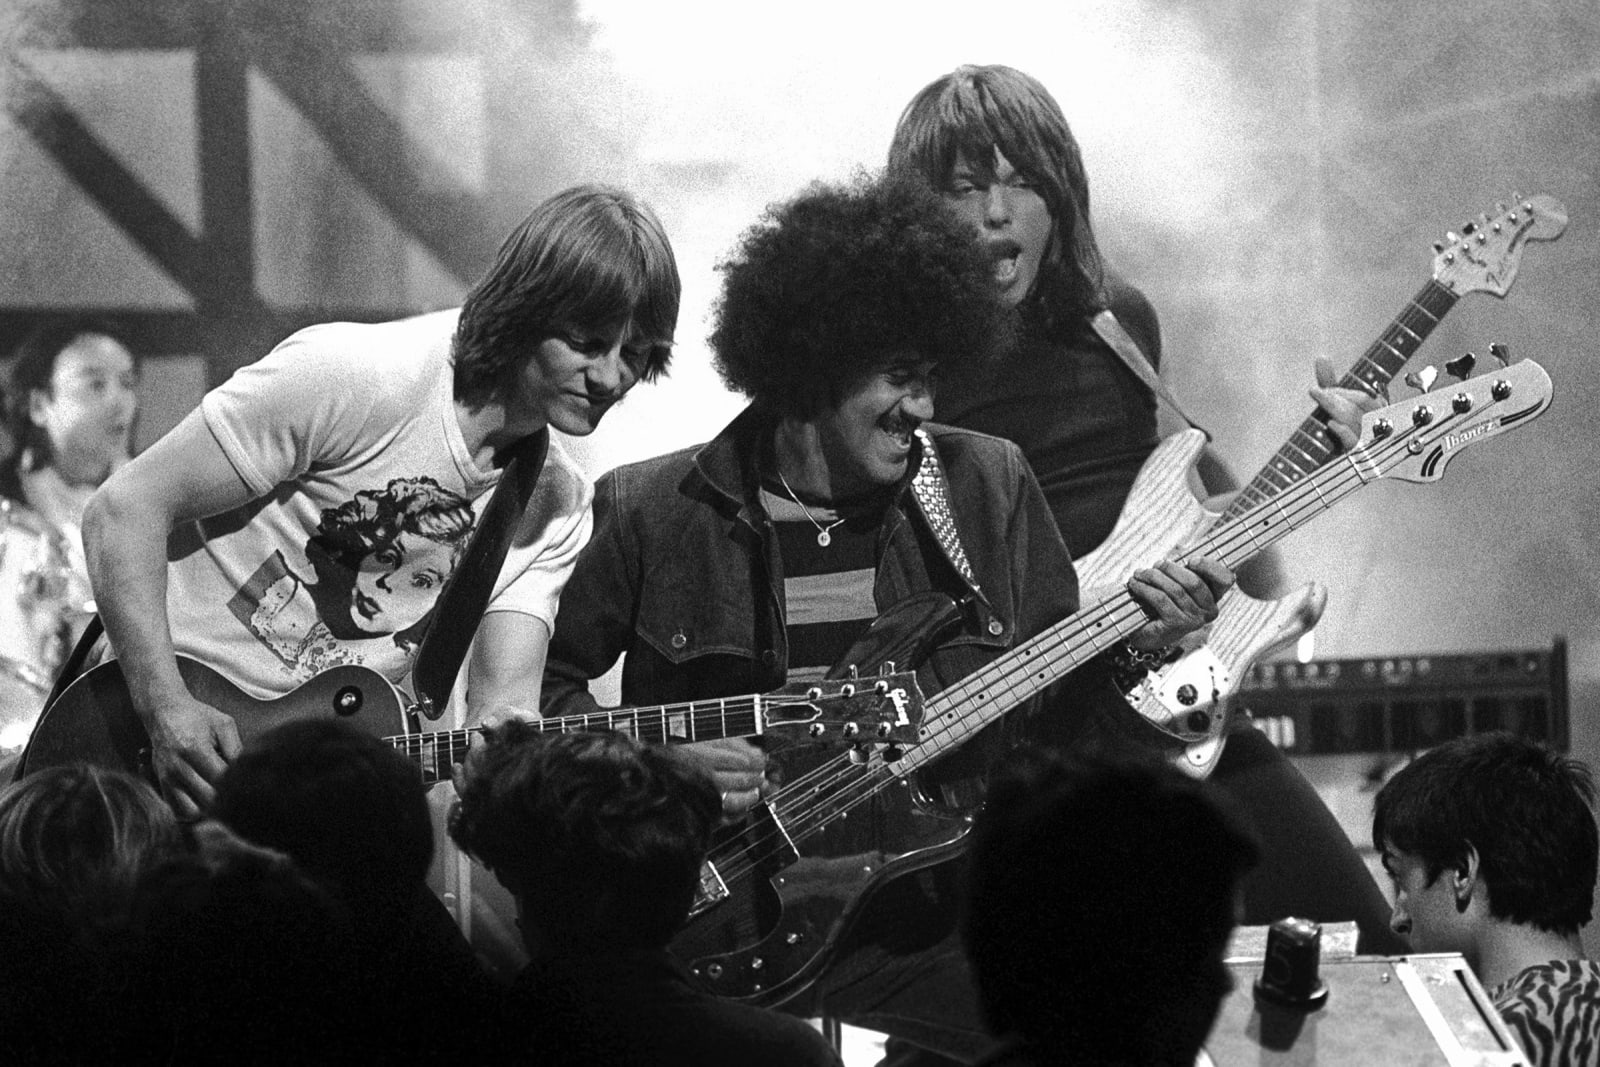 THIN LIZZY, Thin Lizzy Top Of The Pops, 1981